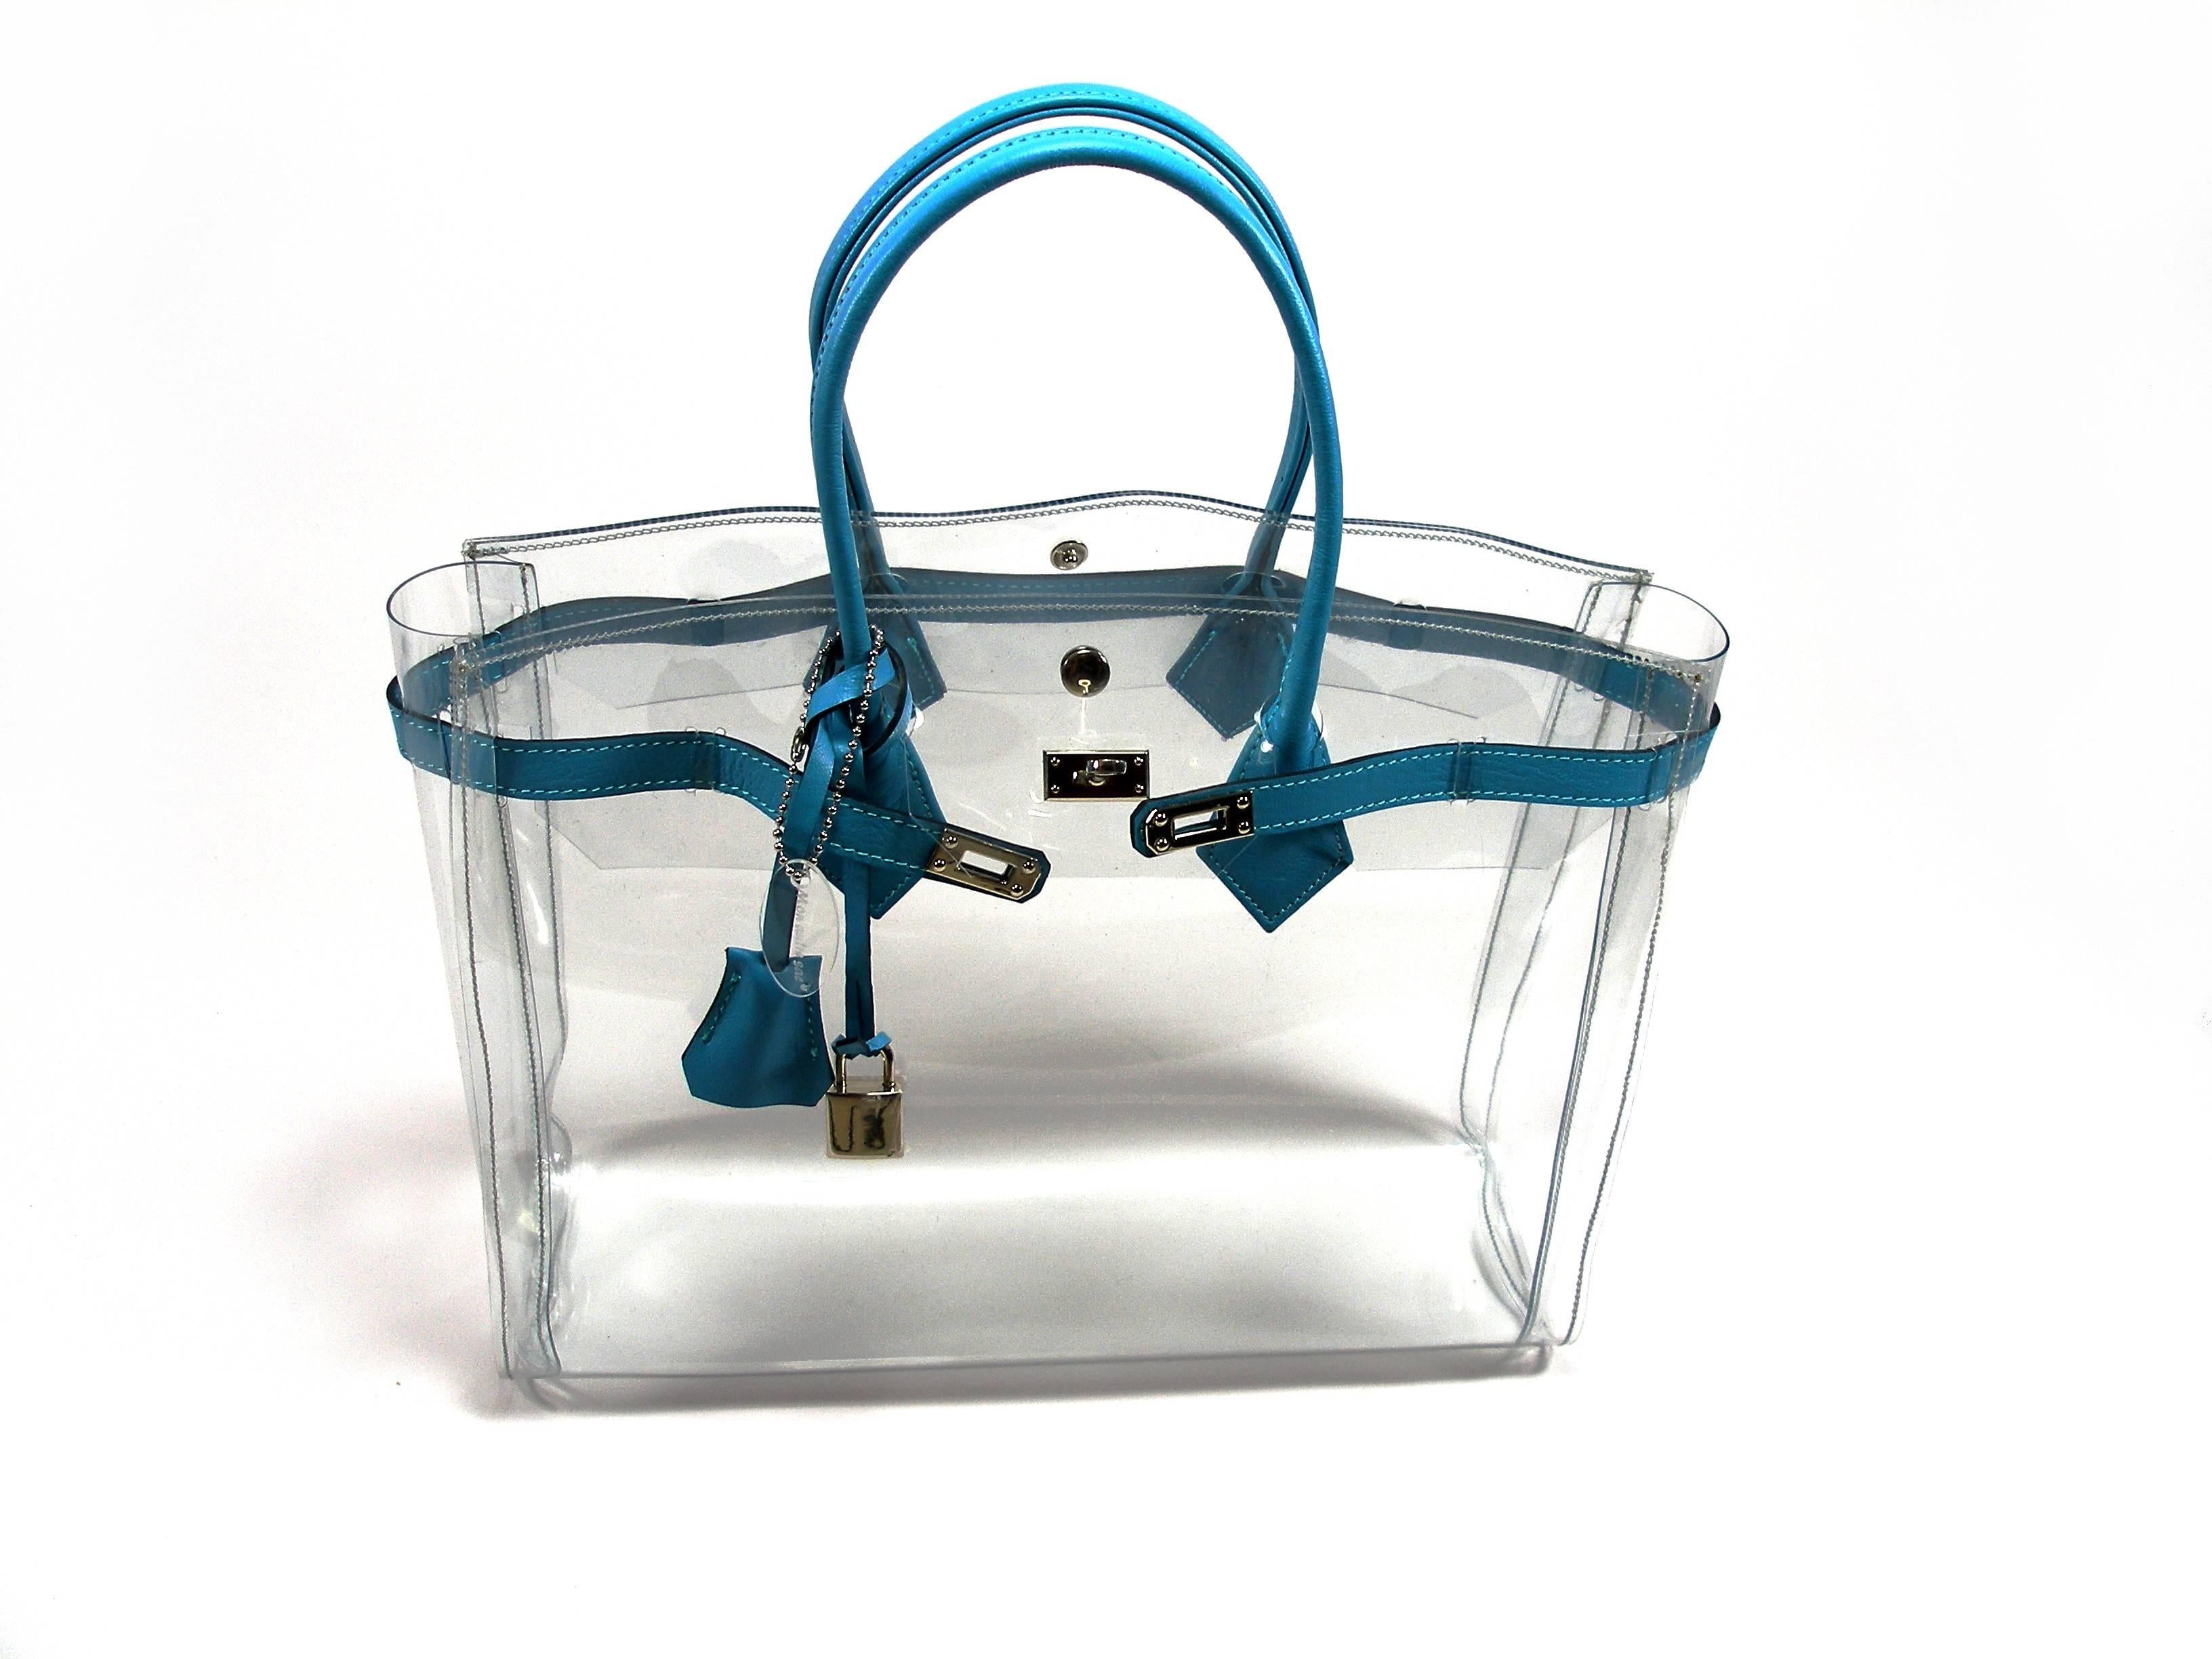  MA-GNI-FIC 
Our own production and brand filed Mon Autre Sac ® 
Highlight your luxury accessories!
Nice Pvc and Leather Bag 
Cabas Diamant 
Size :  L 32 X H 24 X P 12
Bleu ciel leather
Brand New
Its comes with dustbag Mon Autre Sac ®
INTERNATIONALS